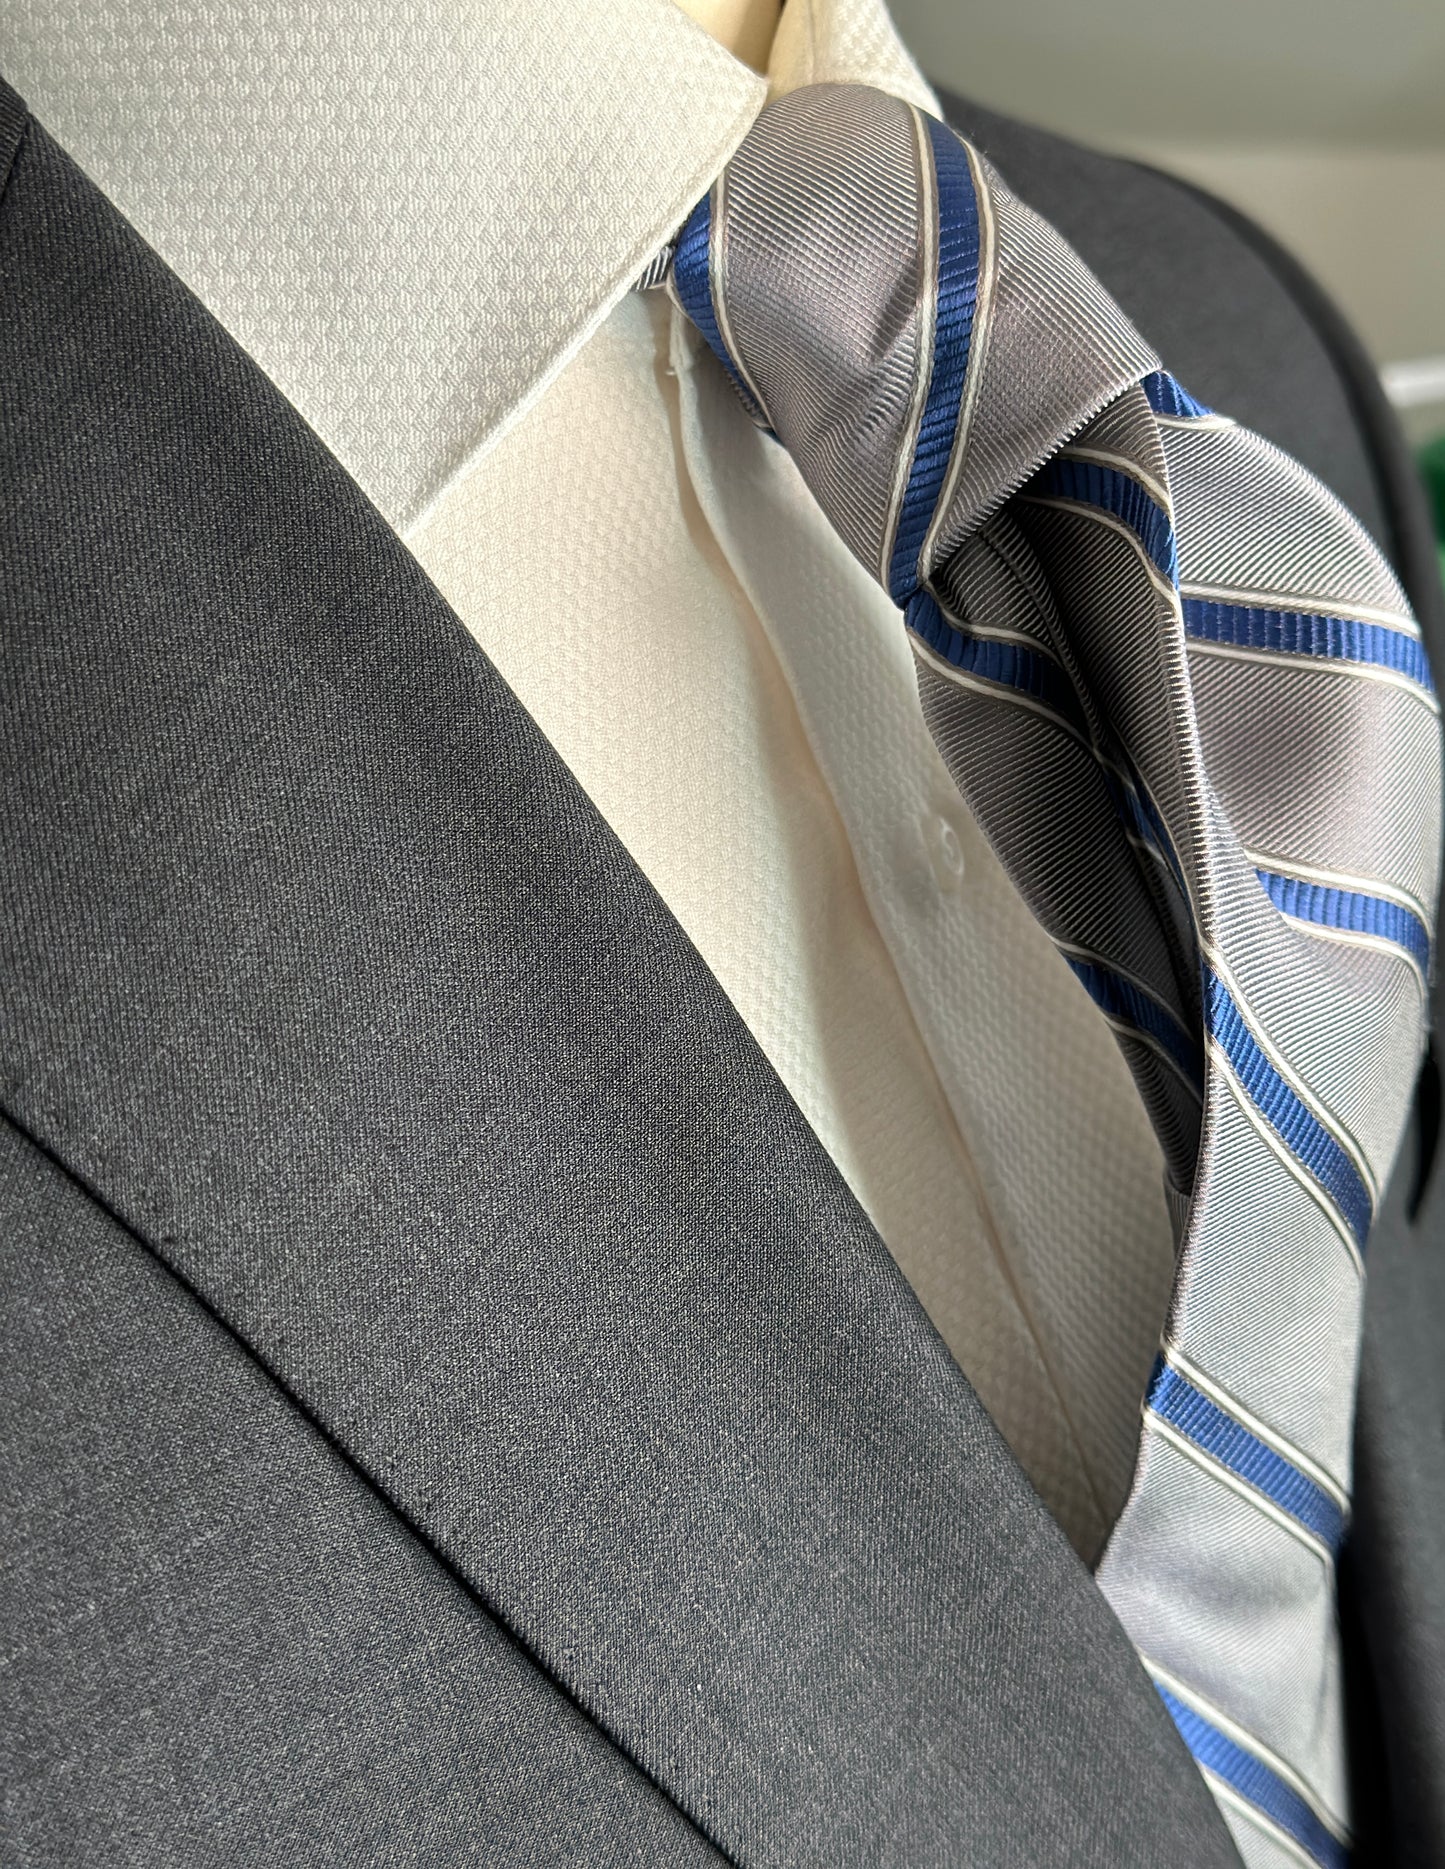 This 100% woven silk tie is a perfect stone grey. Allowing for matching with many colors, the stone grey is very neutral in its base. Added is a touch of french blue stripe. Just enough to bring out the blue in any garment or shirt. 